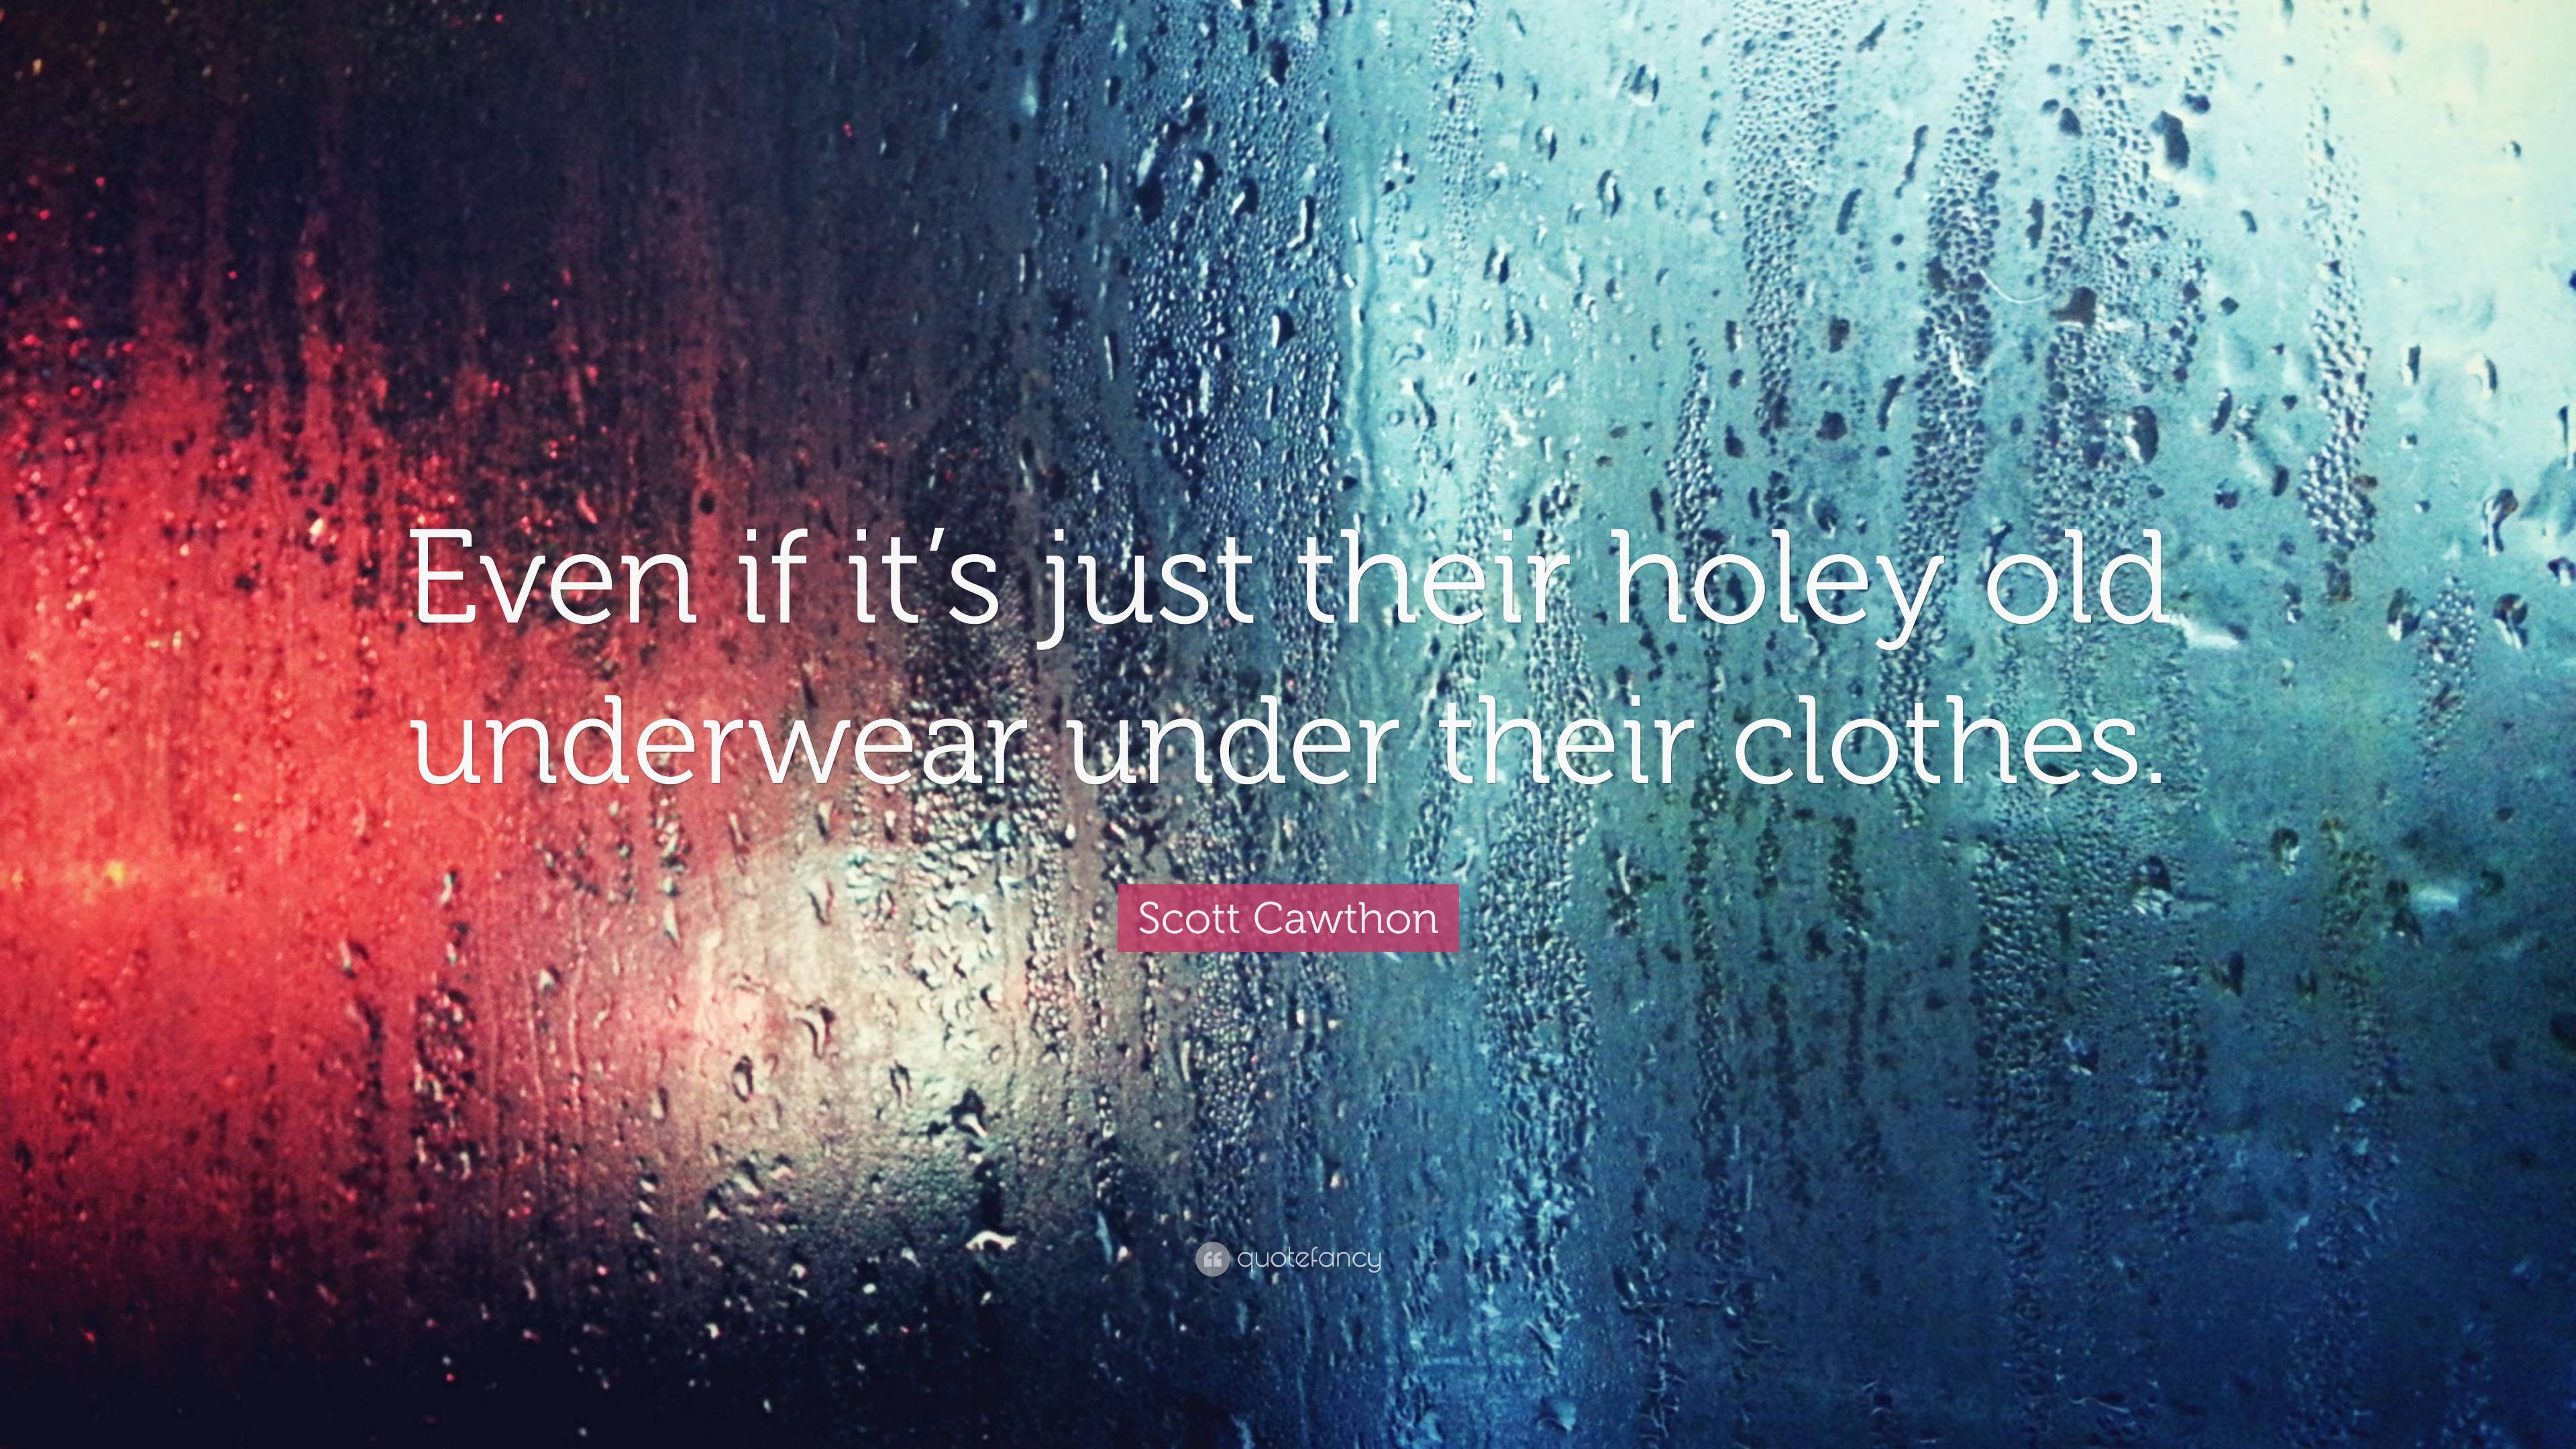 https://quotefancy.com/media/wallpaper/3840x2160/7591961-Scott-Cawthon-Quote-Even-if-it-s-just-their-holey-old-underwear.jpg